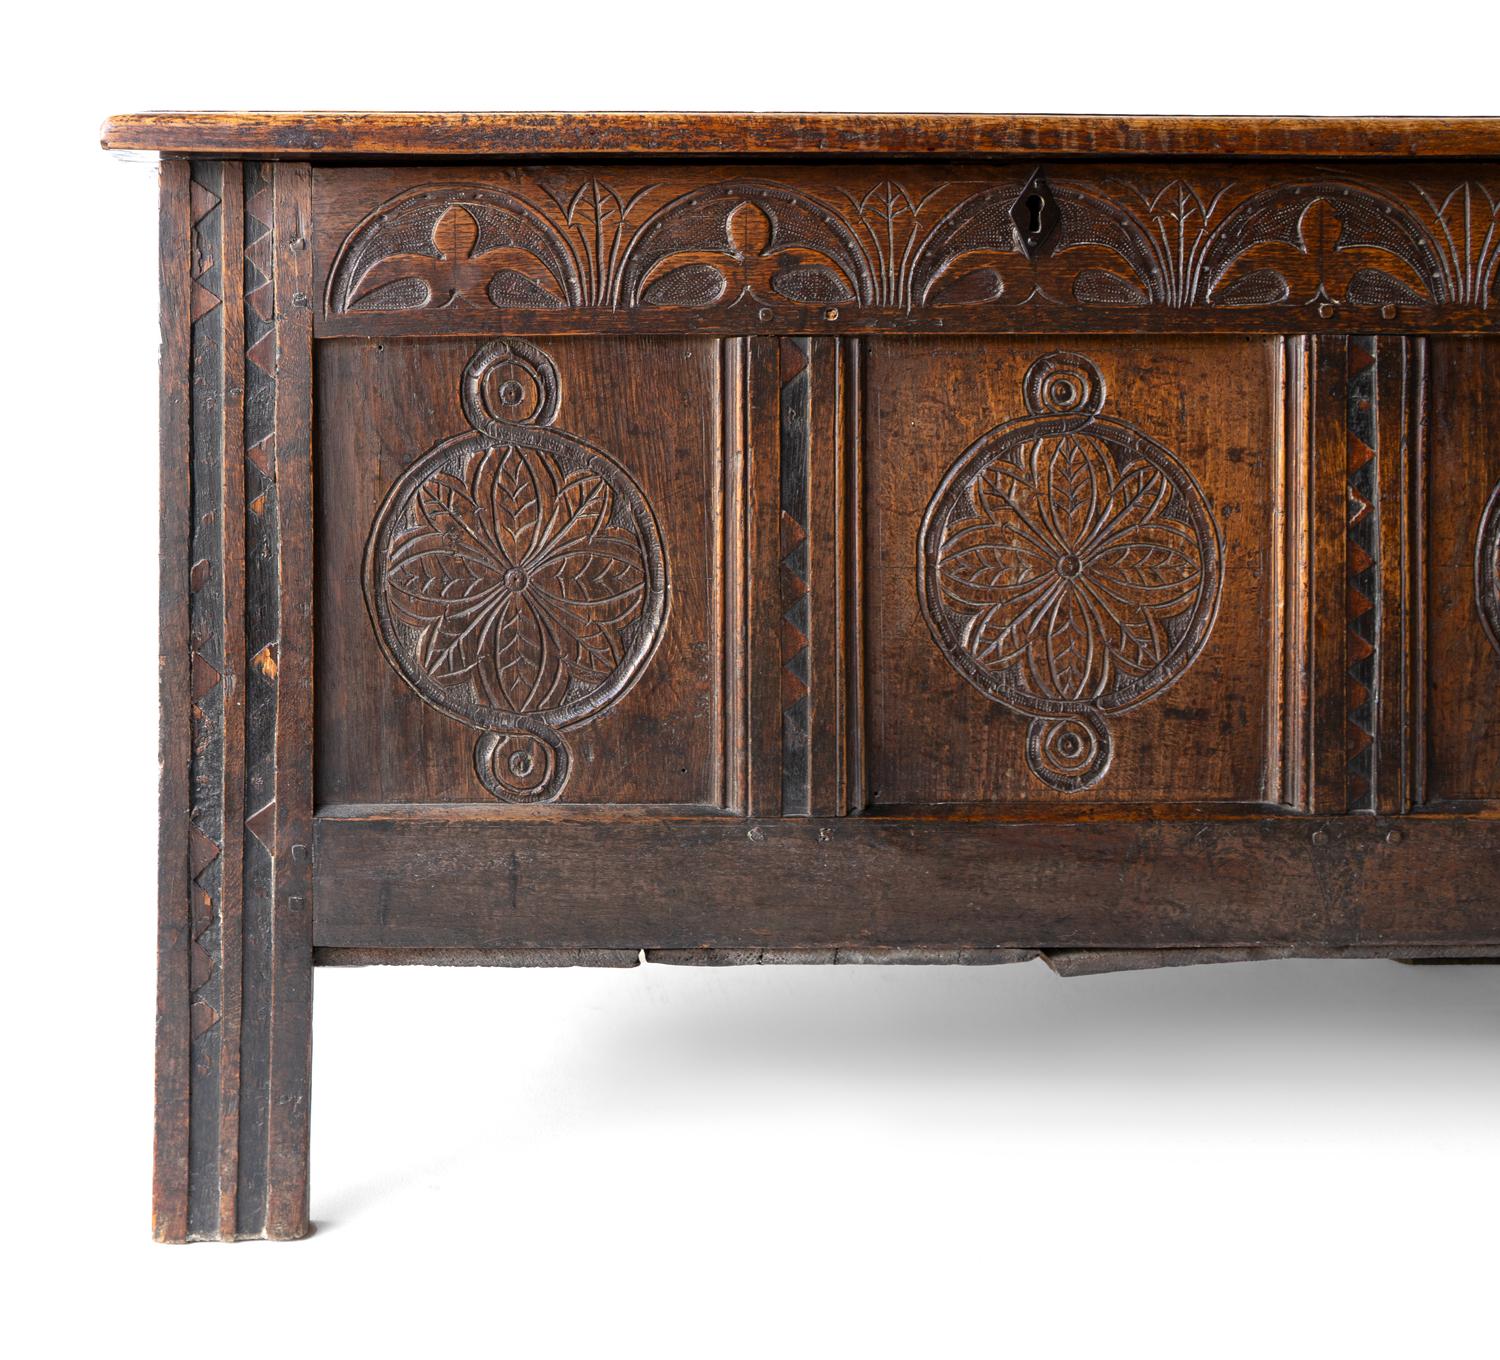 English Antique Charles II West Country Carved Oak Coffer 17th Century Blanket Box Chest For Sale